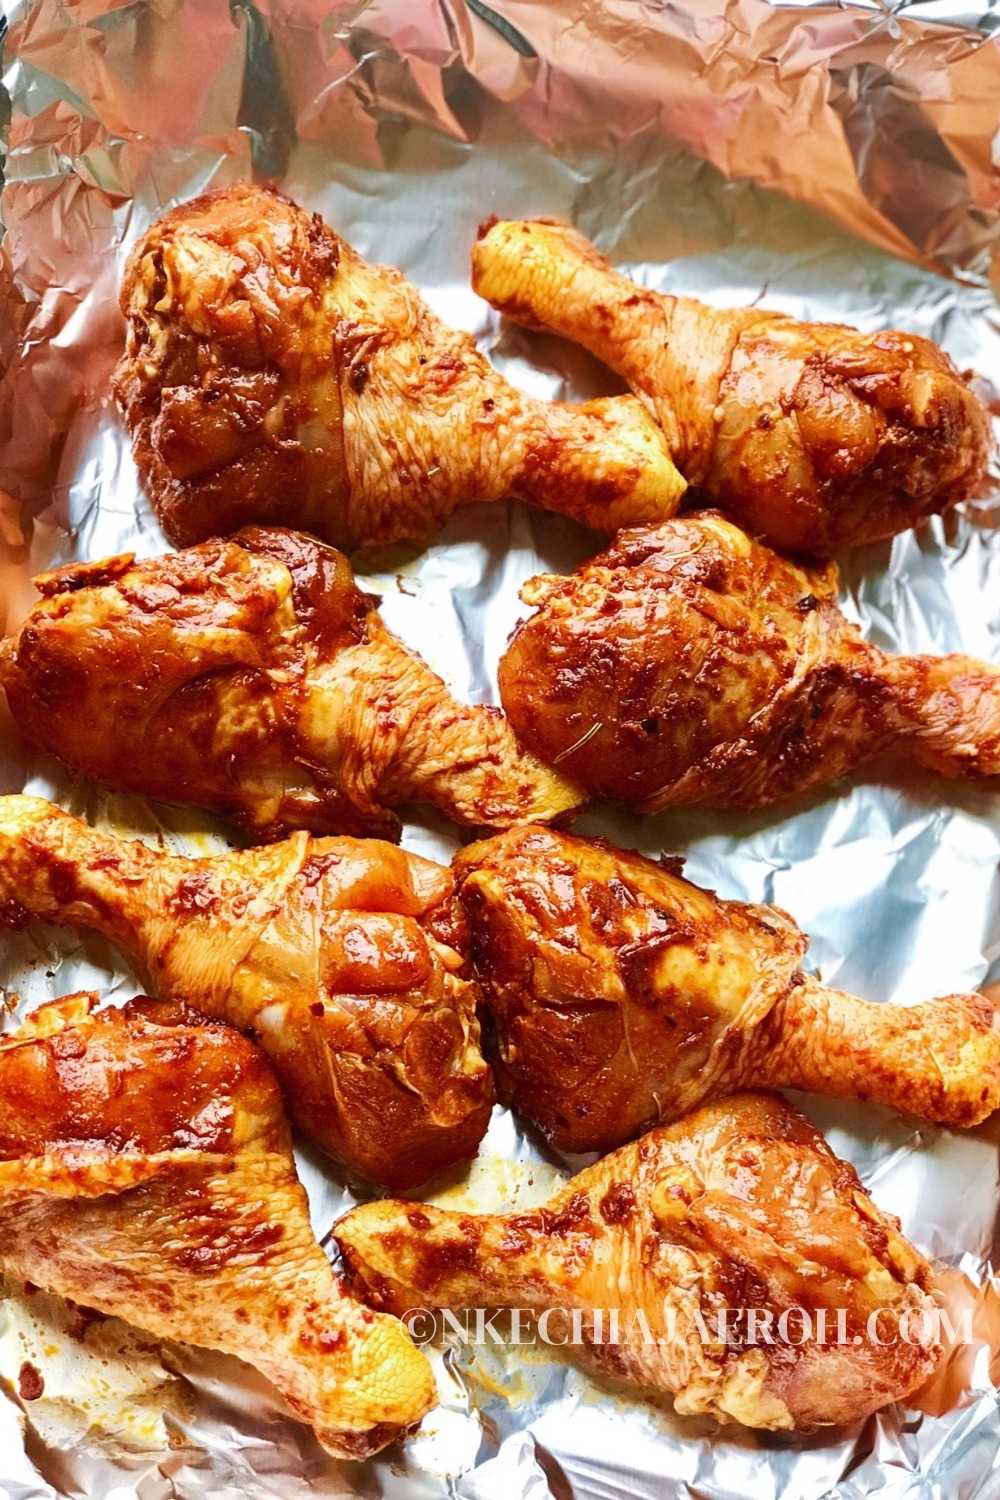 Place the marinated chicken drumsticks on a (foil-lined) baking sheet and place them in a 425 degrees already preheated oven. Bake drumsticks for 35 – 45 minutes (or until the drumsticks are cooked through or the internal thermometer reads 165, set aside to cool.)